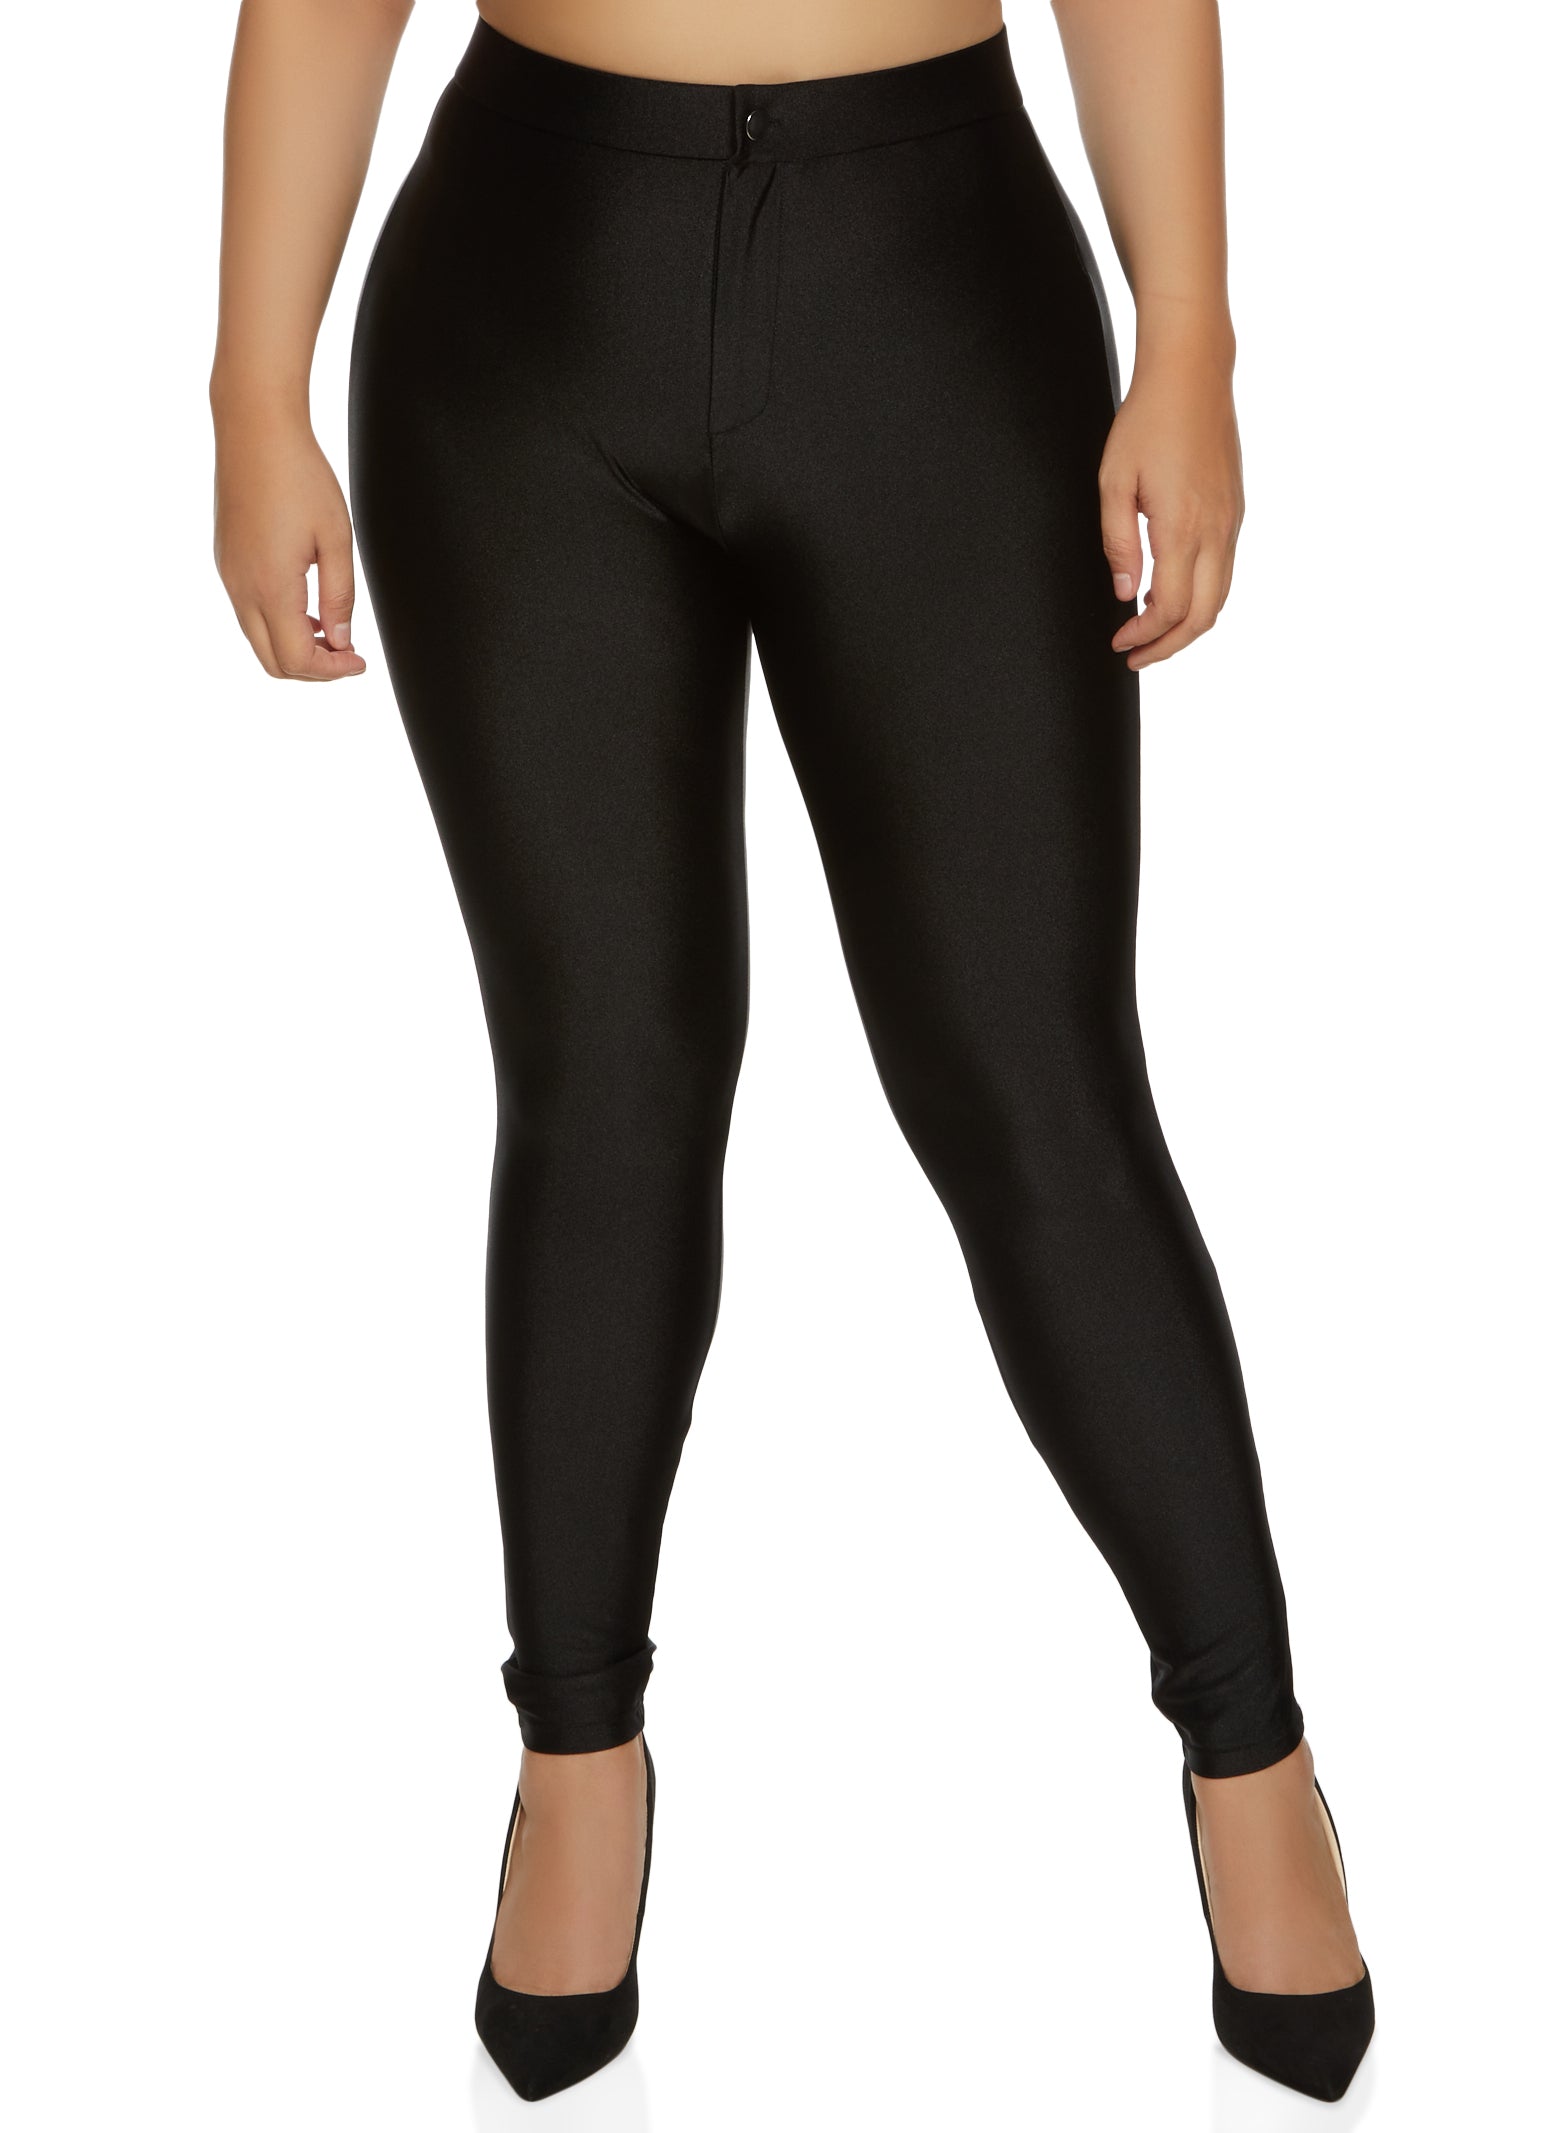 Women's Super Low Rise Leggings With 5 Zippers and Faux Zipper